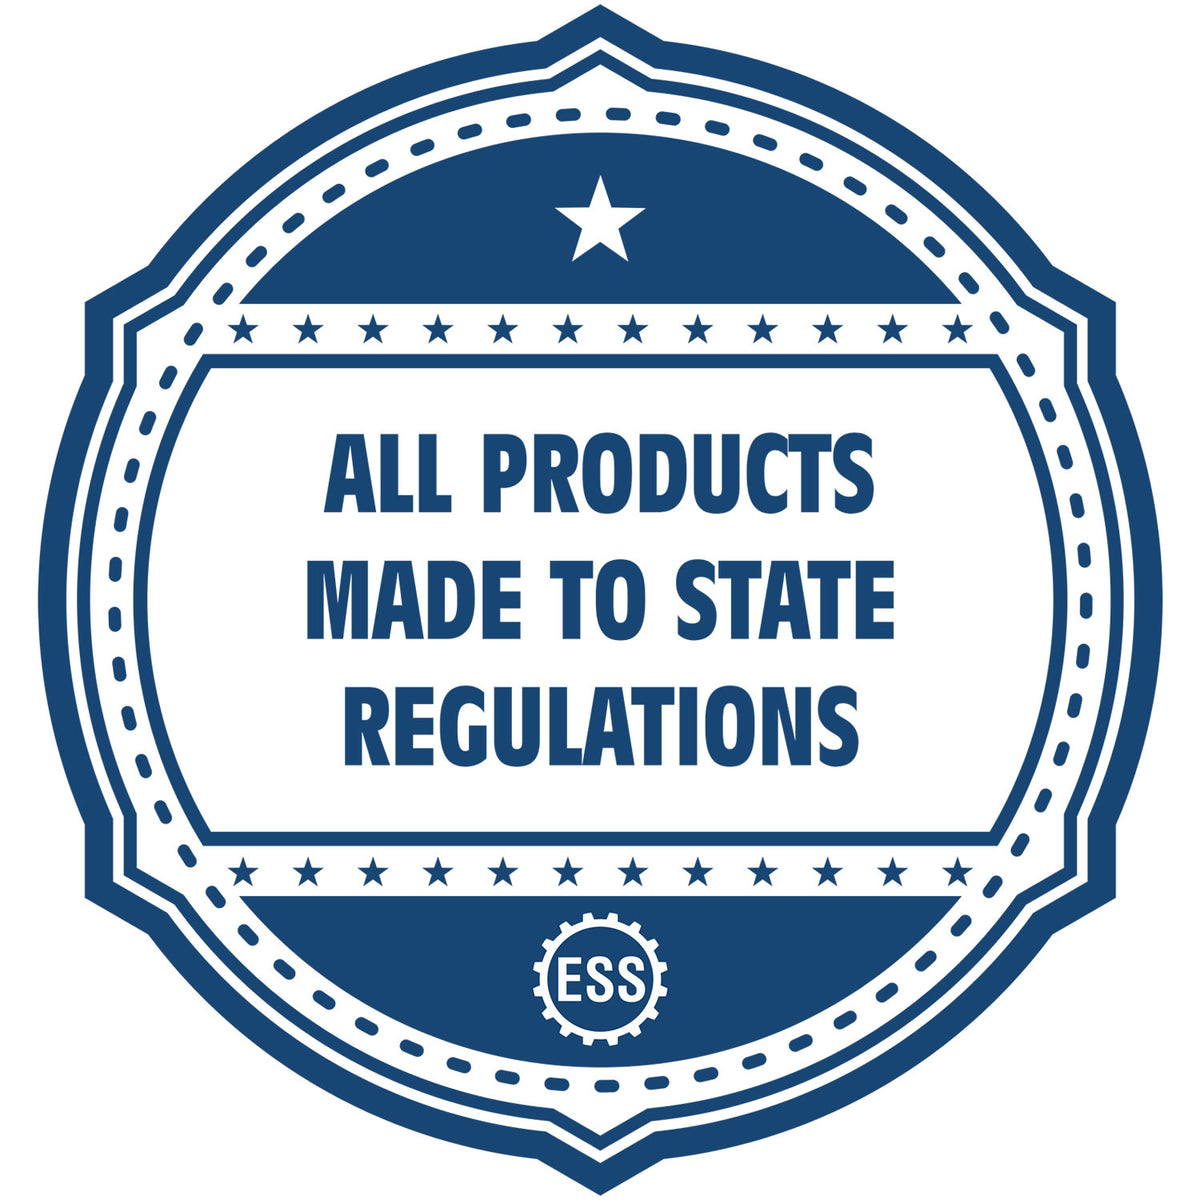 A blue icon or badge for the Slim Pre-Inked Nebraska Professional Geologist Seal Stamp showing that this product is made in compliance with state regulations.